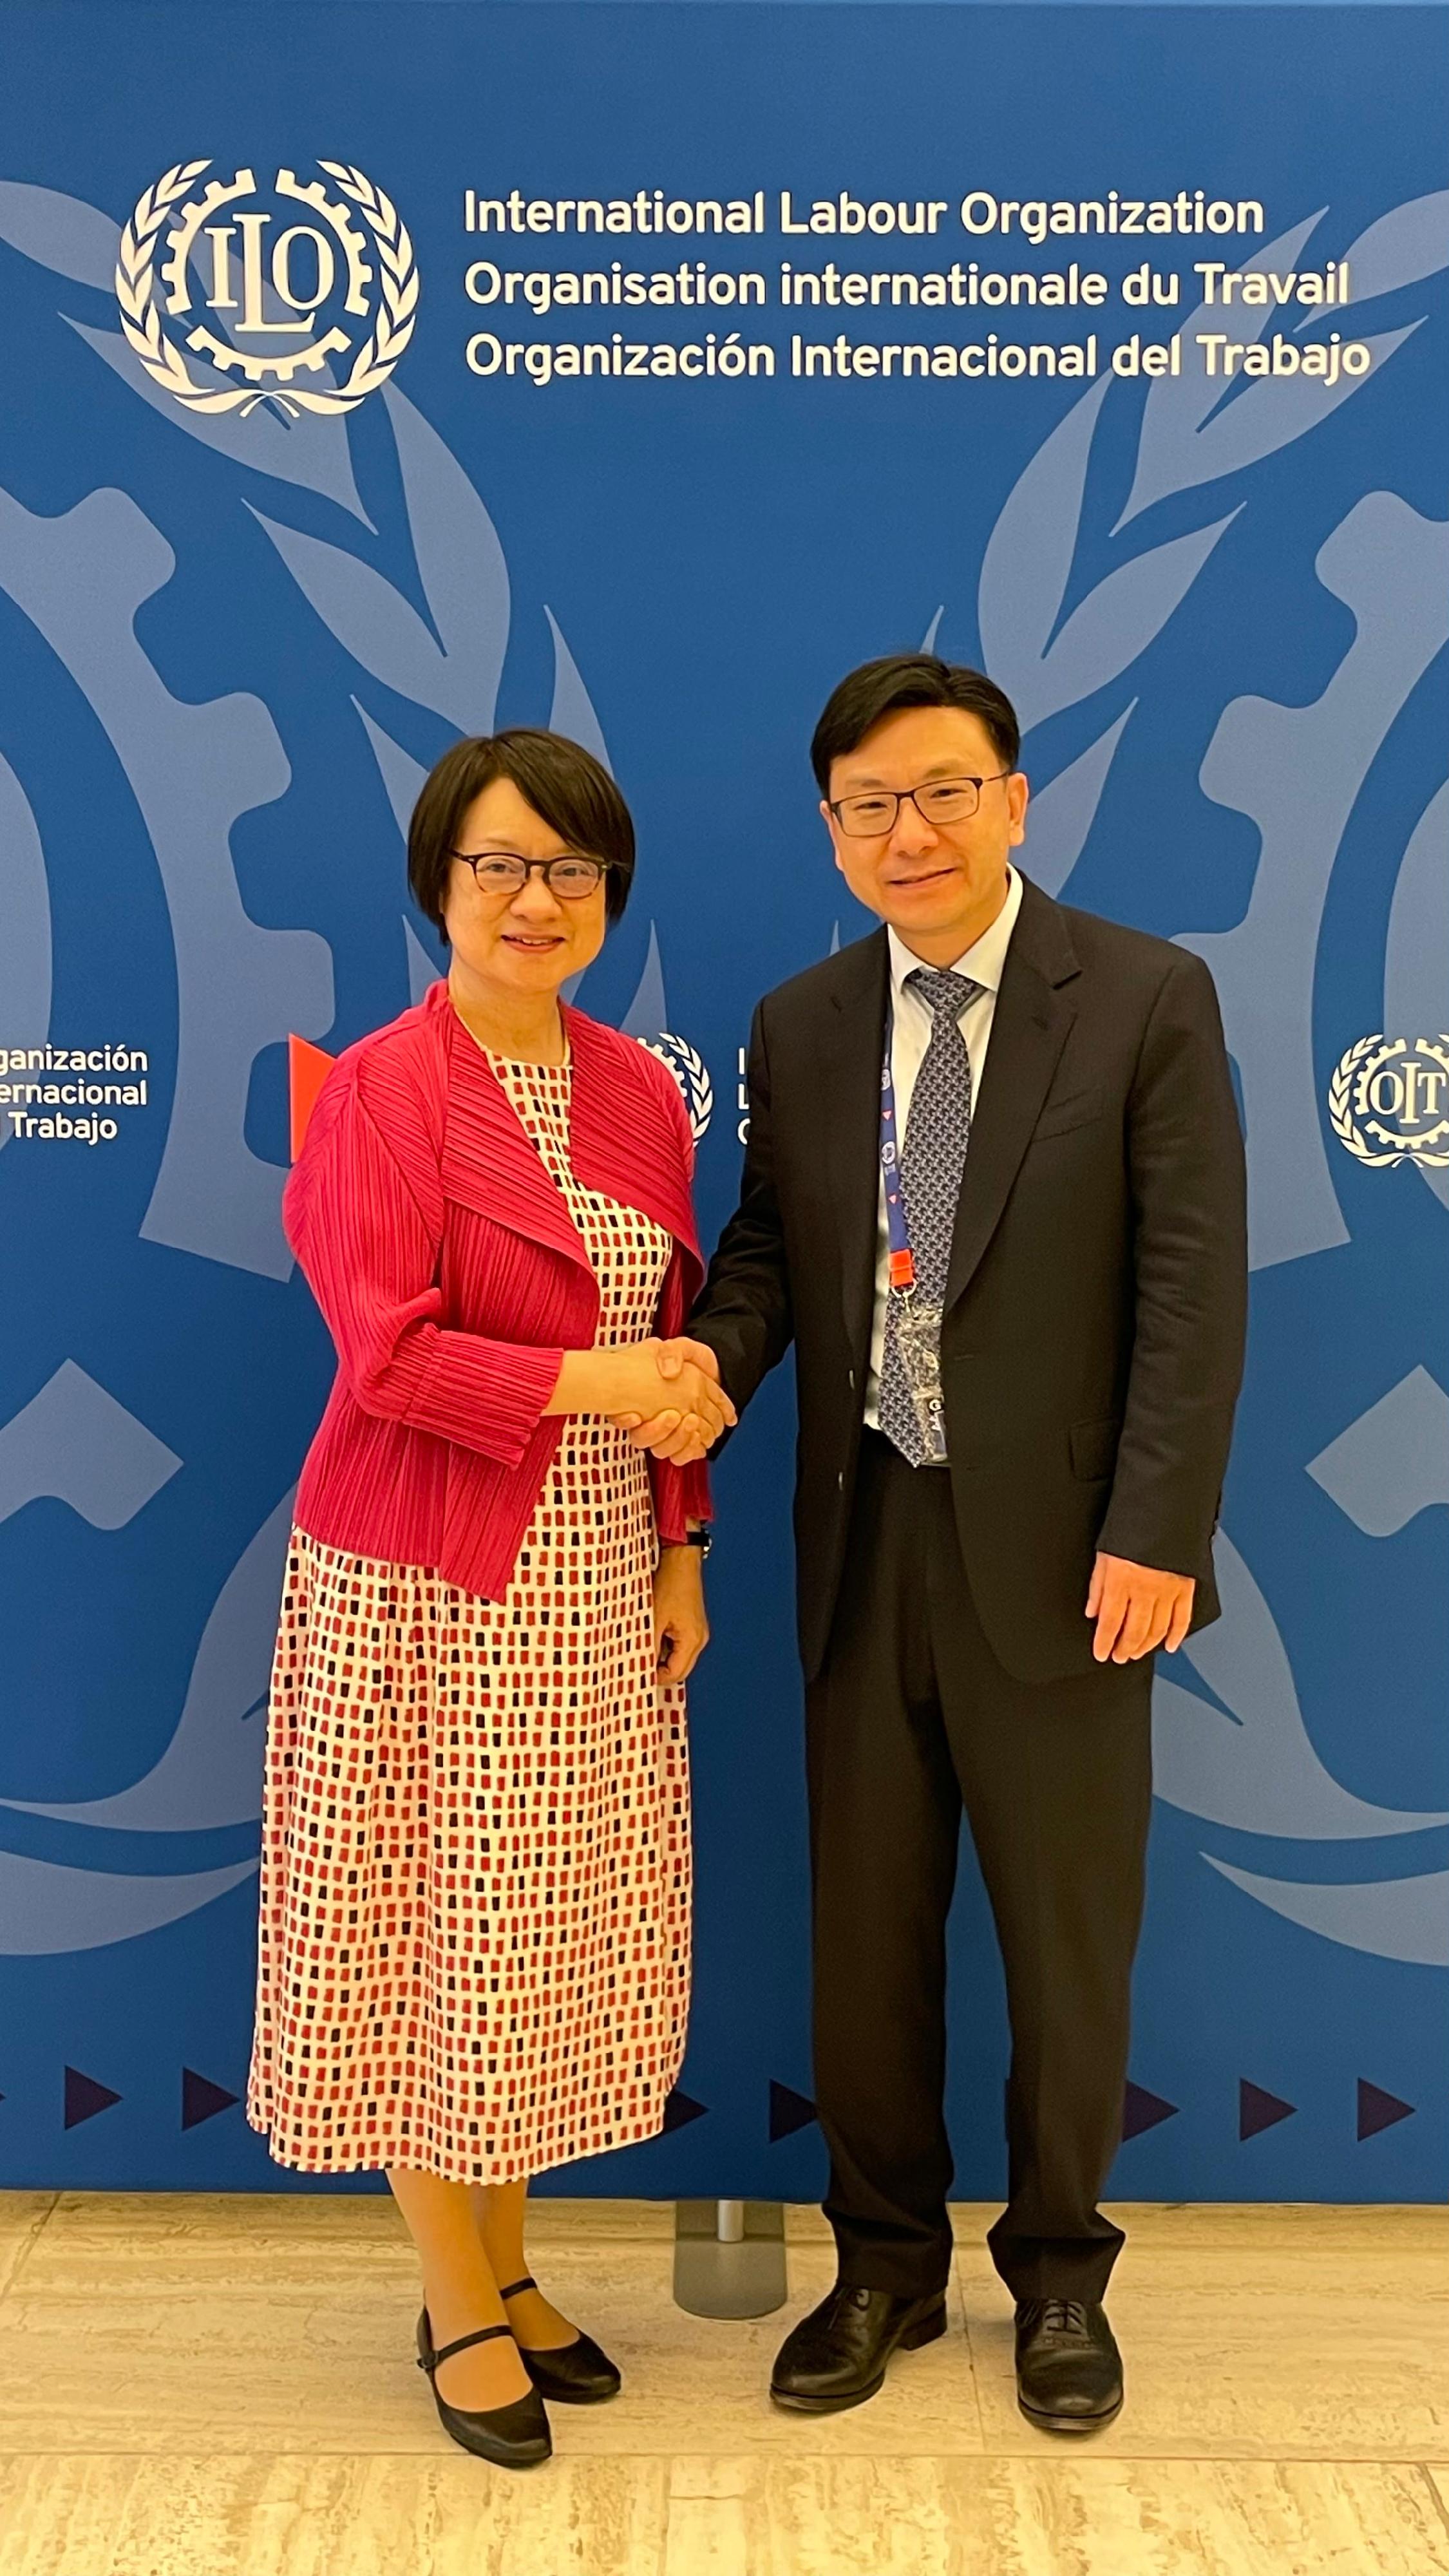 The Secretary for Labour and Welfare, Mr Chris Sun, arrived in Geneva, Switzerland, on June 8 (Geneva time) and started his visit. He was joined by the Commissioner for Labour, Ms May Chan. Photo shows Mr Sun (right) in a bilateral meeting with the Assistant Director-General of the International Labour Organization (ILO) and the Regional Director for the ILO Office for Asia and the Pacific, Ms Chihoko Asada-Miyakawa (left), on June 9 afternoon. He introduced the latest situation of the labour market, economy and employment in Hong Kong.